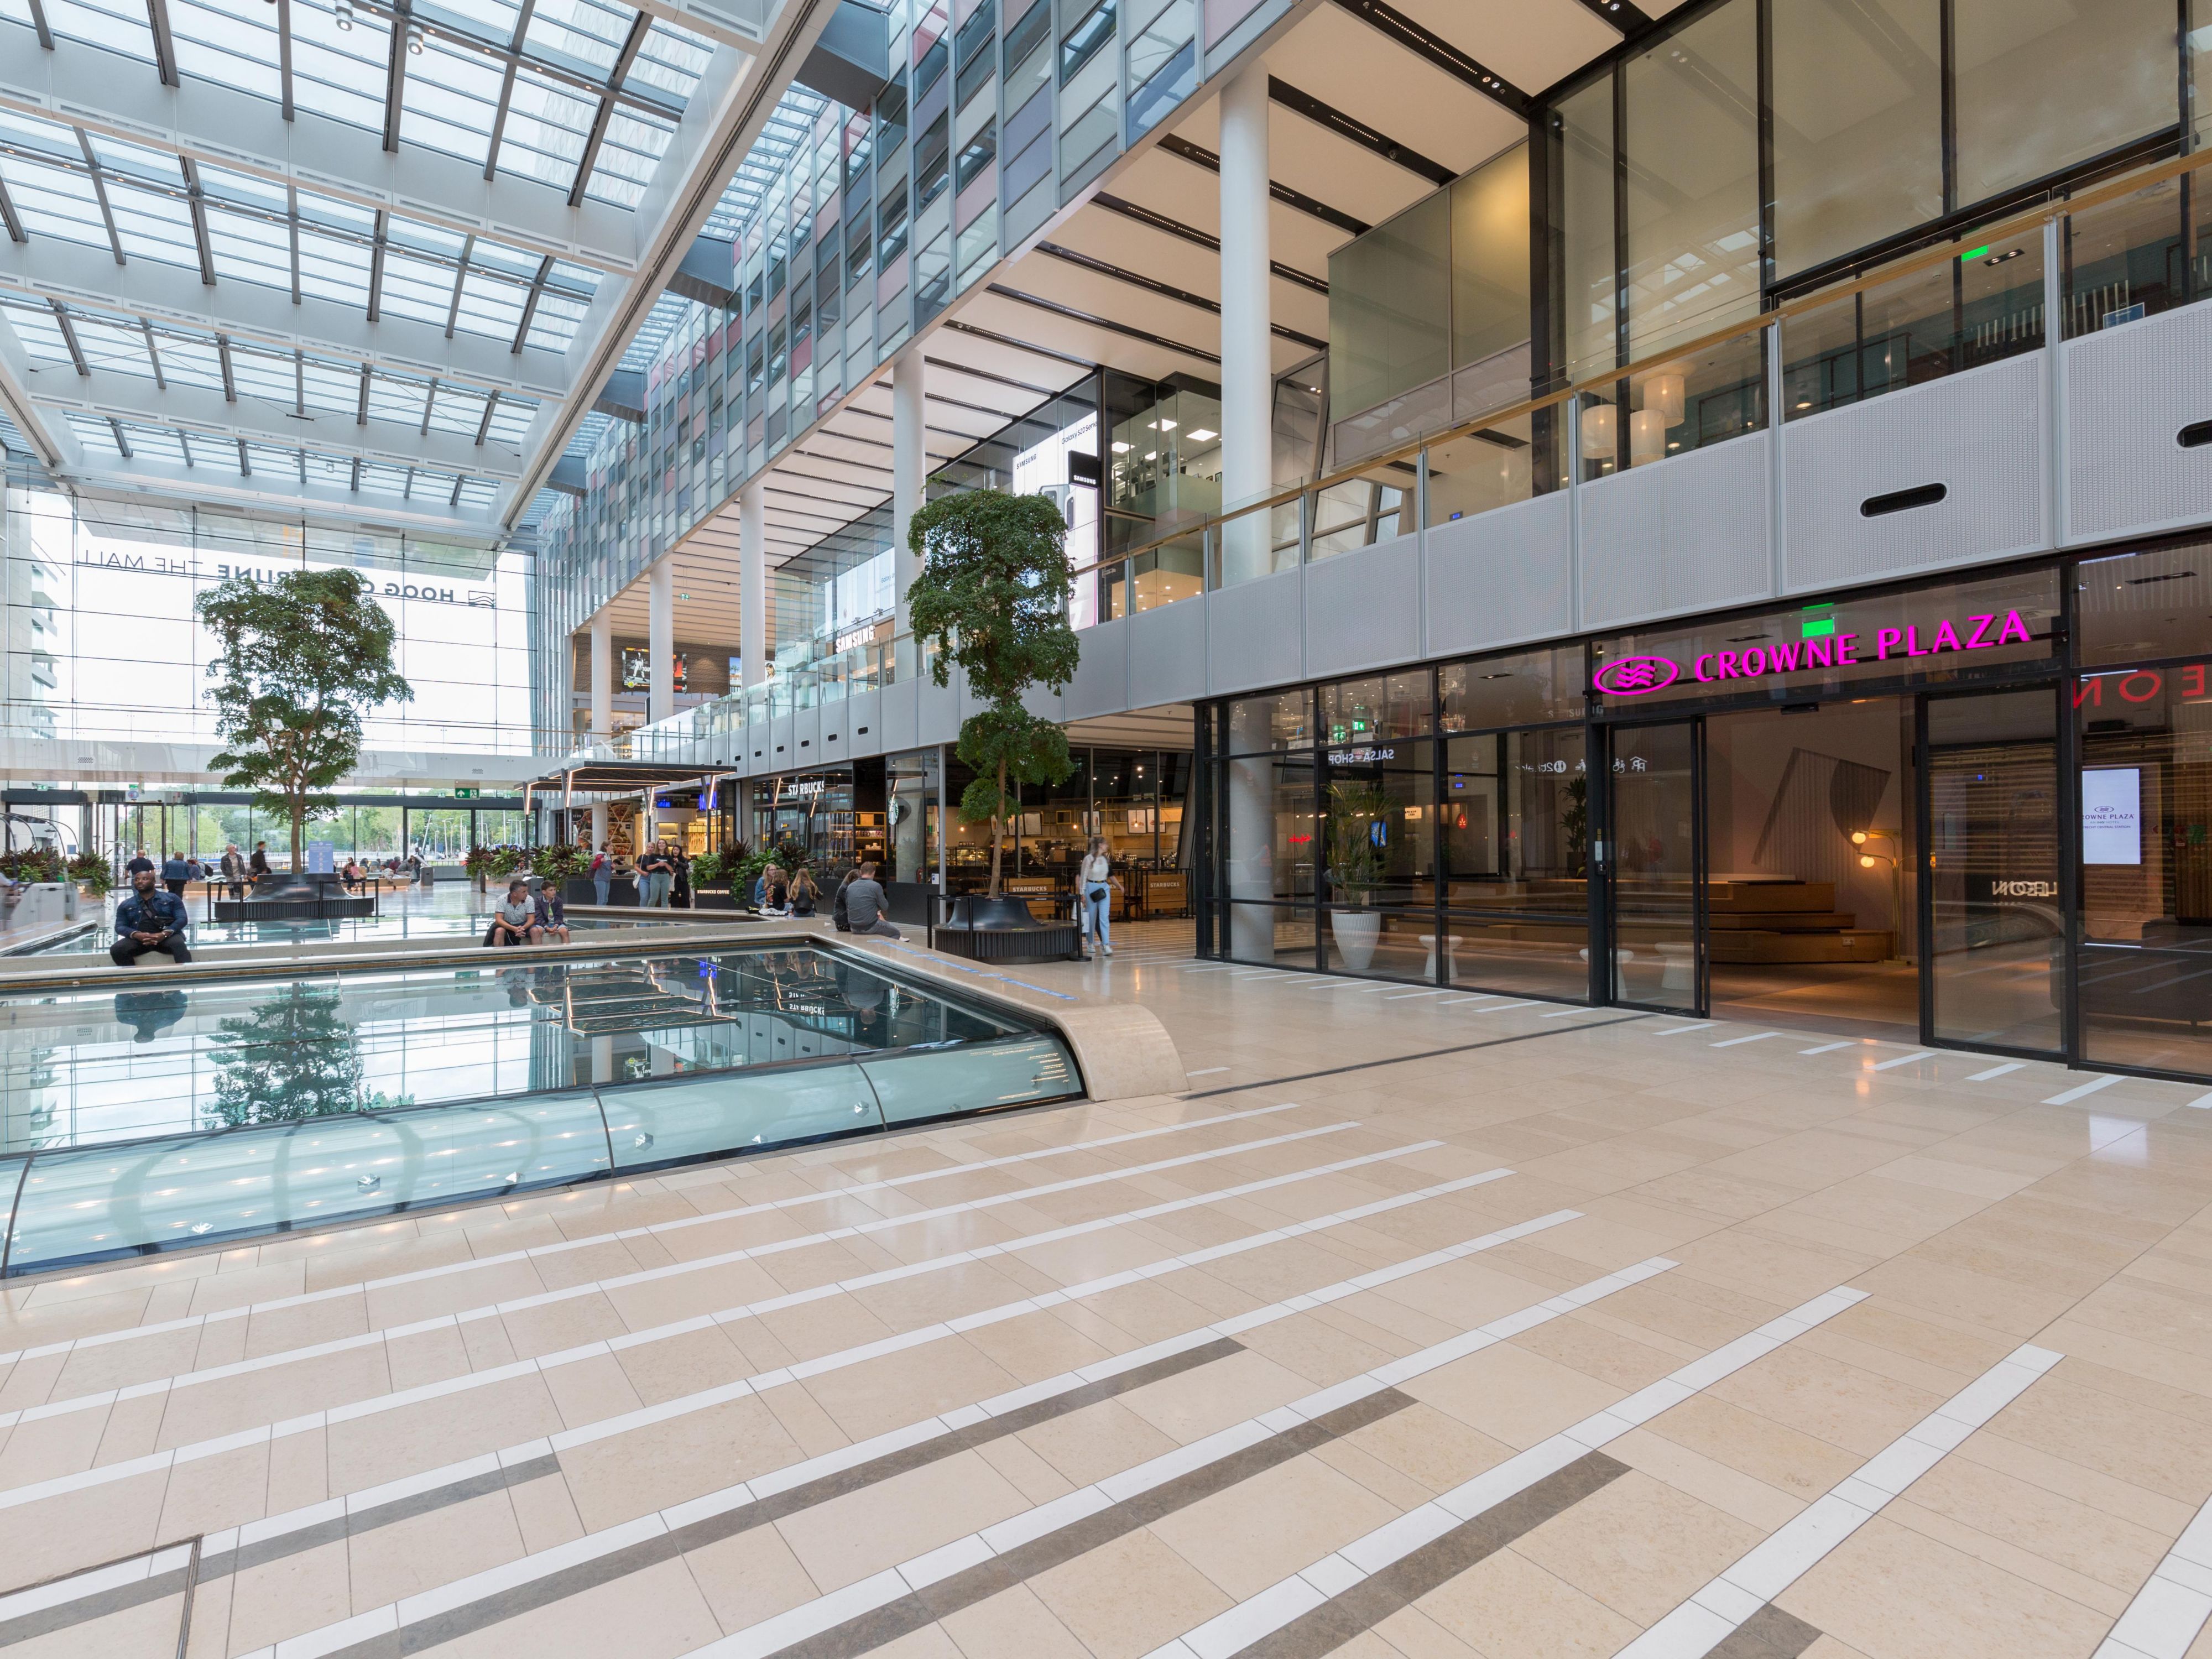 Hotel Crowne Plaza Utrecht is located in Hoog Catharijne shopping mall, right by the Utrecht Central Station. For directions from Utrecht Central Station and the parking garage P5, please click Learn More.